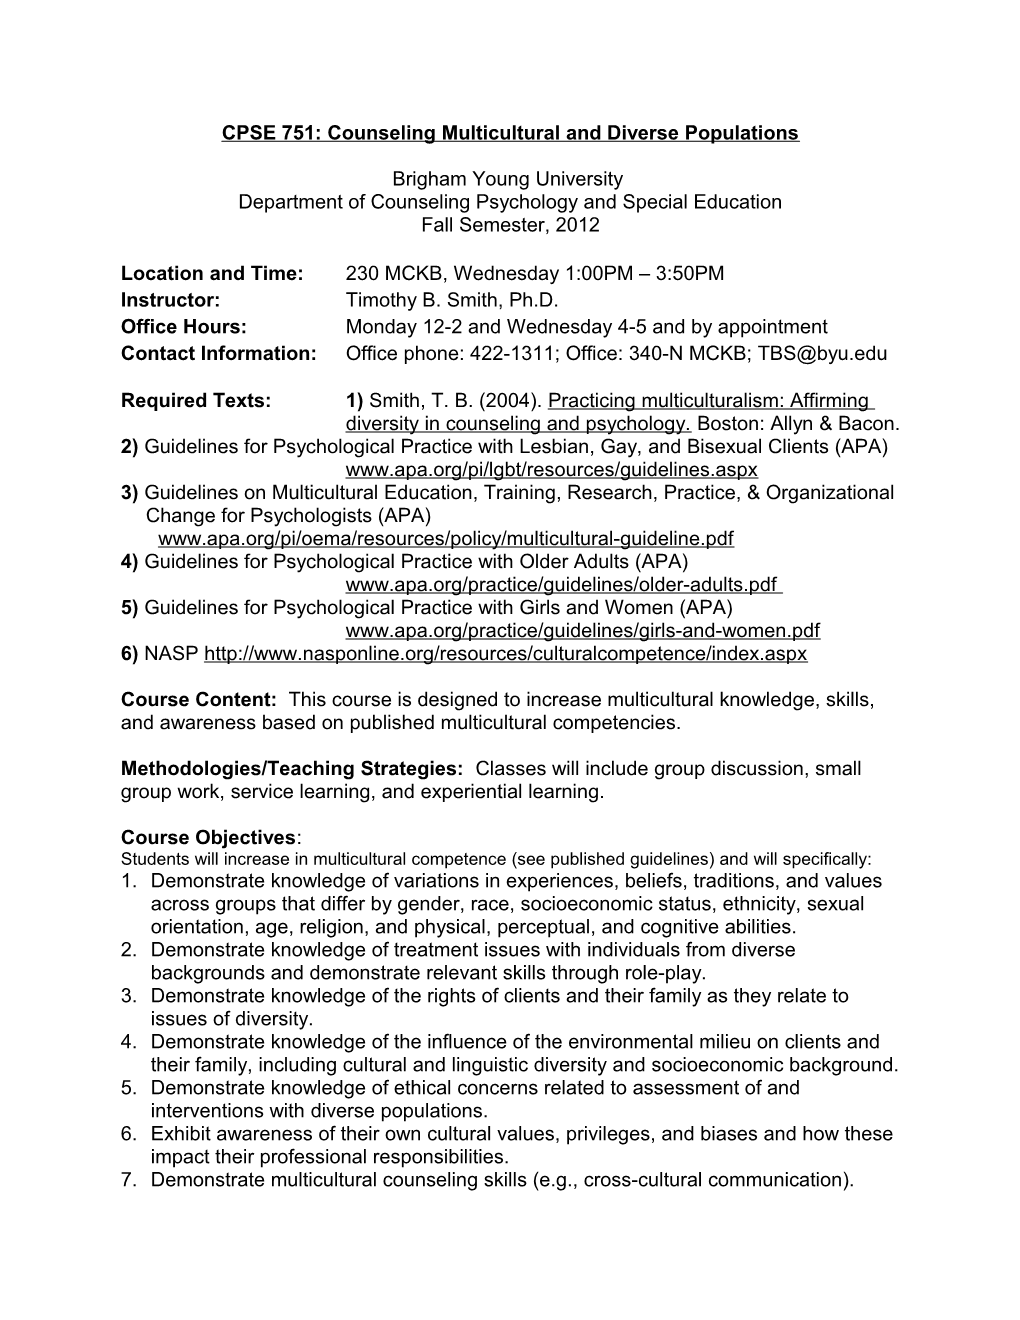 Proposed Syllabus Outline (Revised 6/13/97)